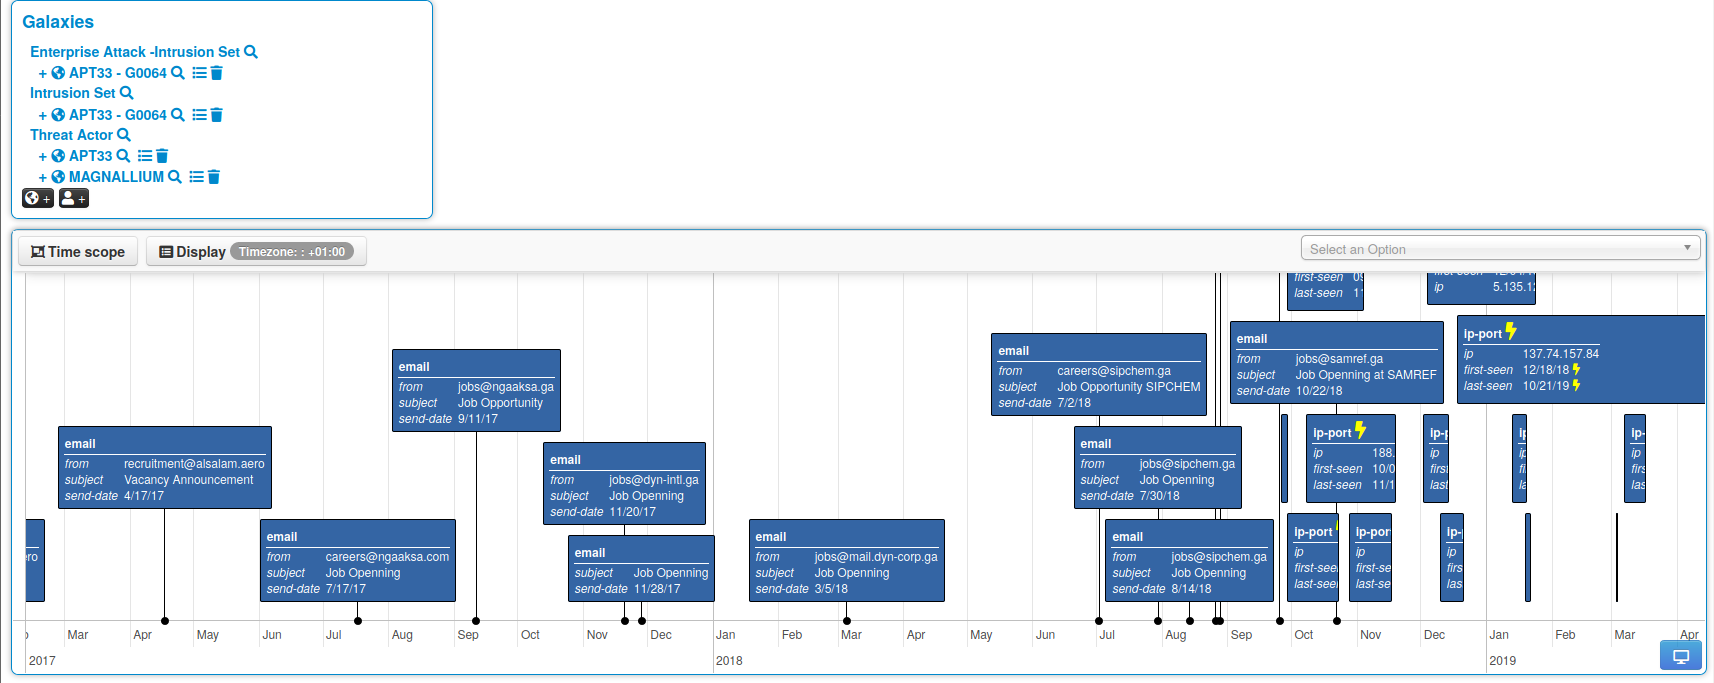 The representation of spear phishing using the timeline function in MISP